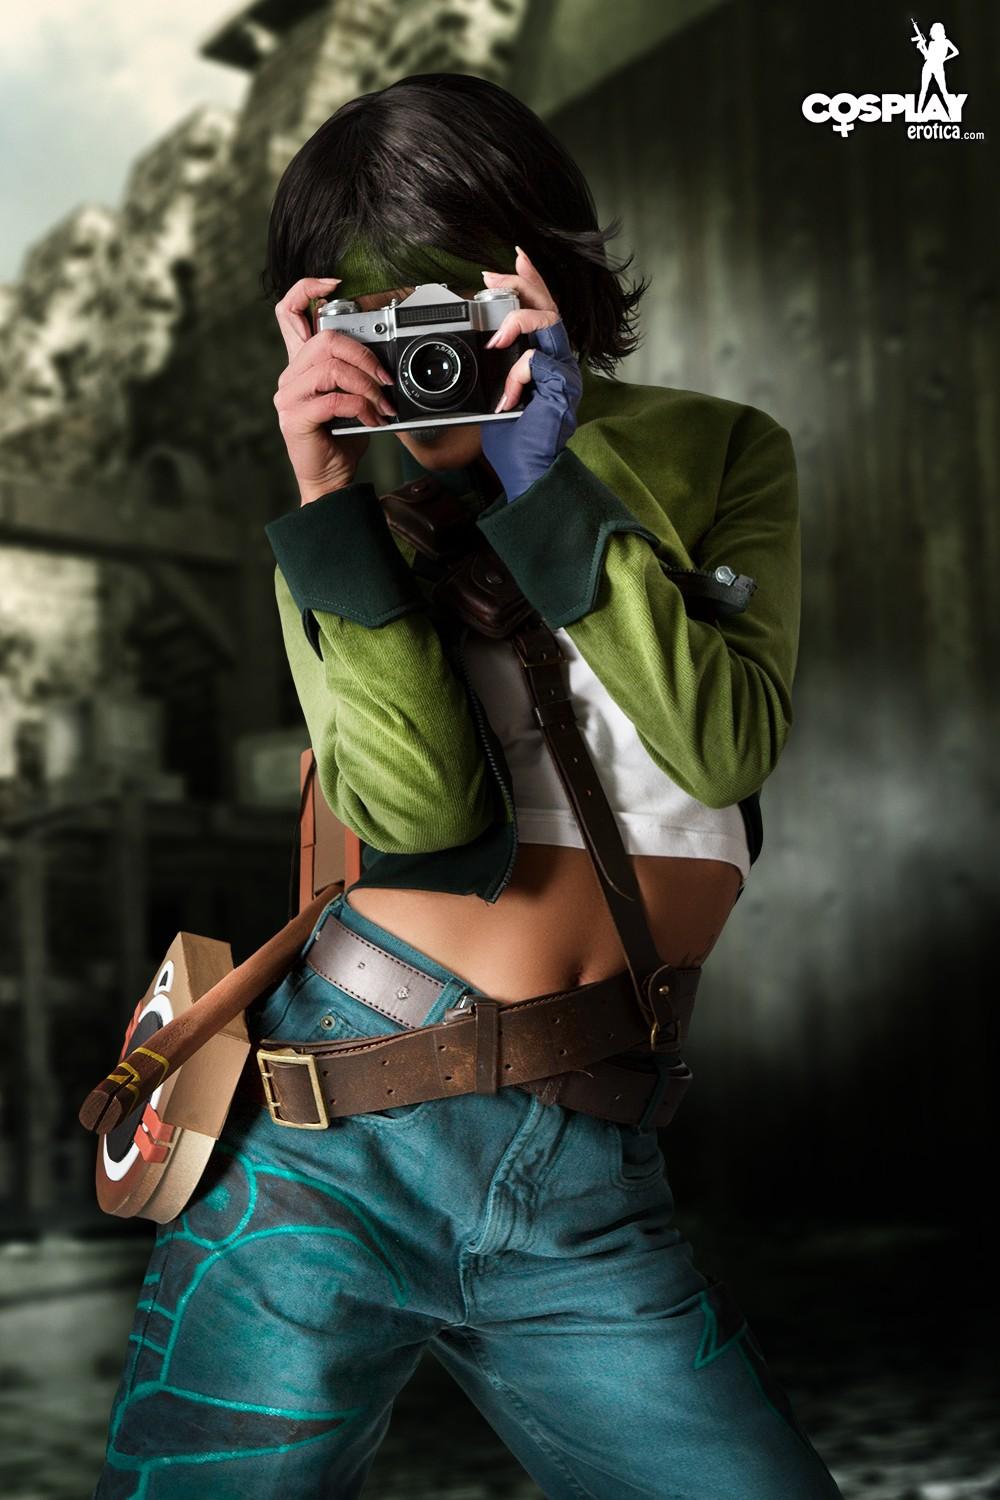 Cosplay hottie Zorah dresses up as Jade from Beyond Good and Evil #60210555